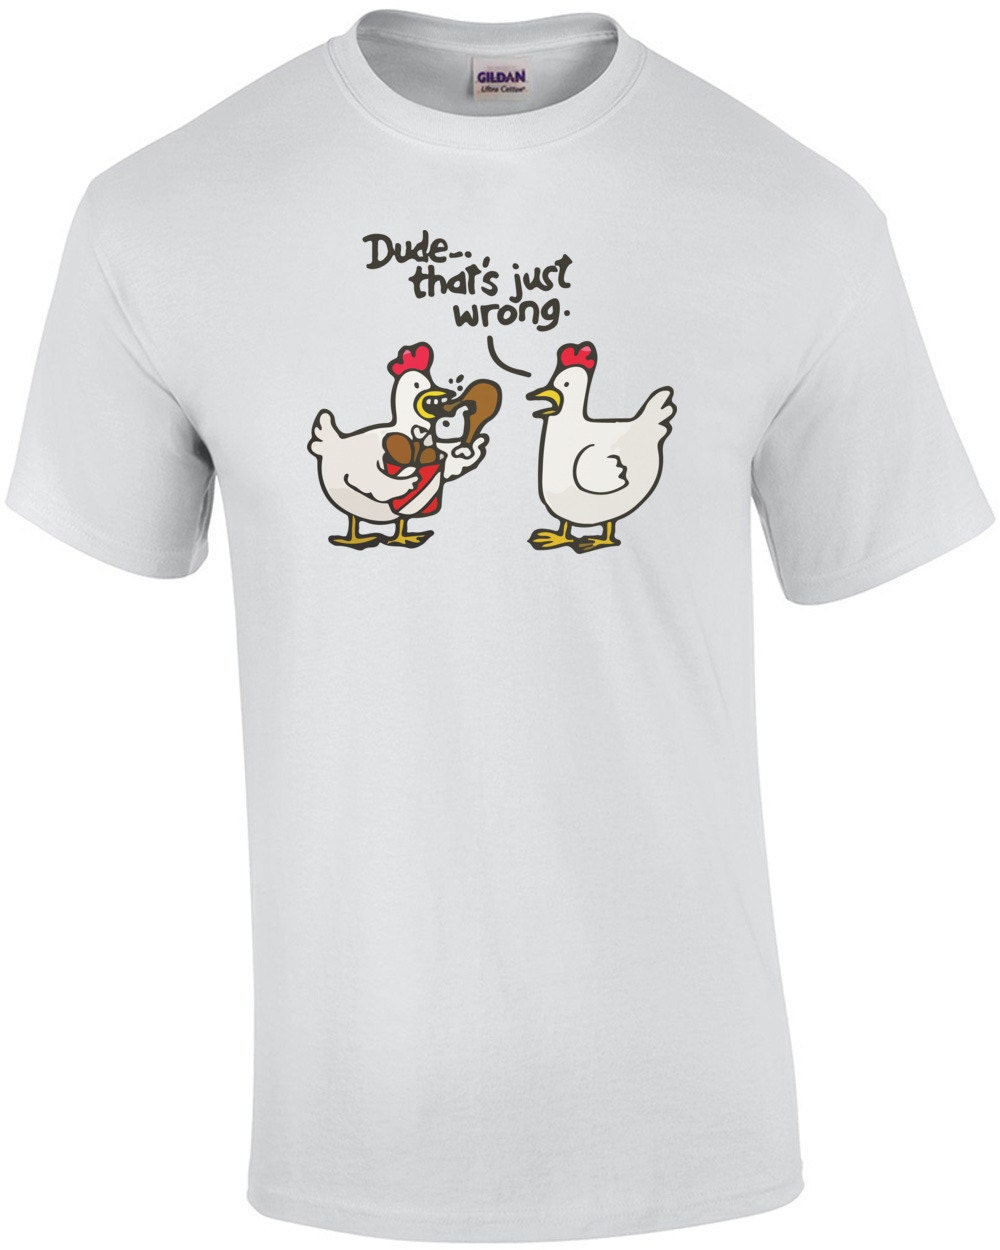 Dude that's just wrong. Funny Chicken T-Shirt